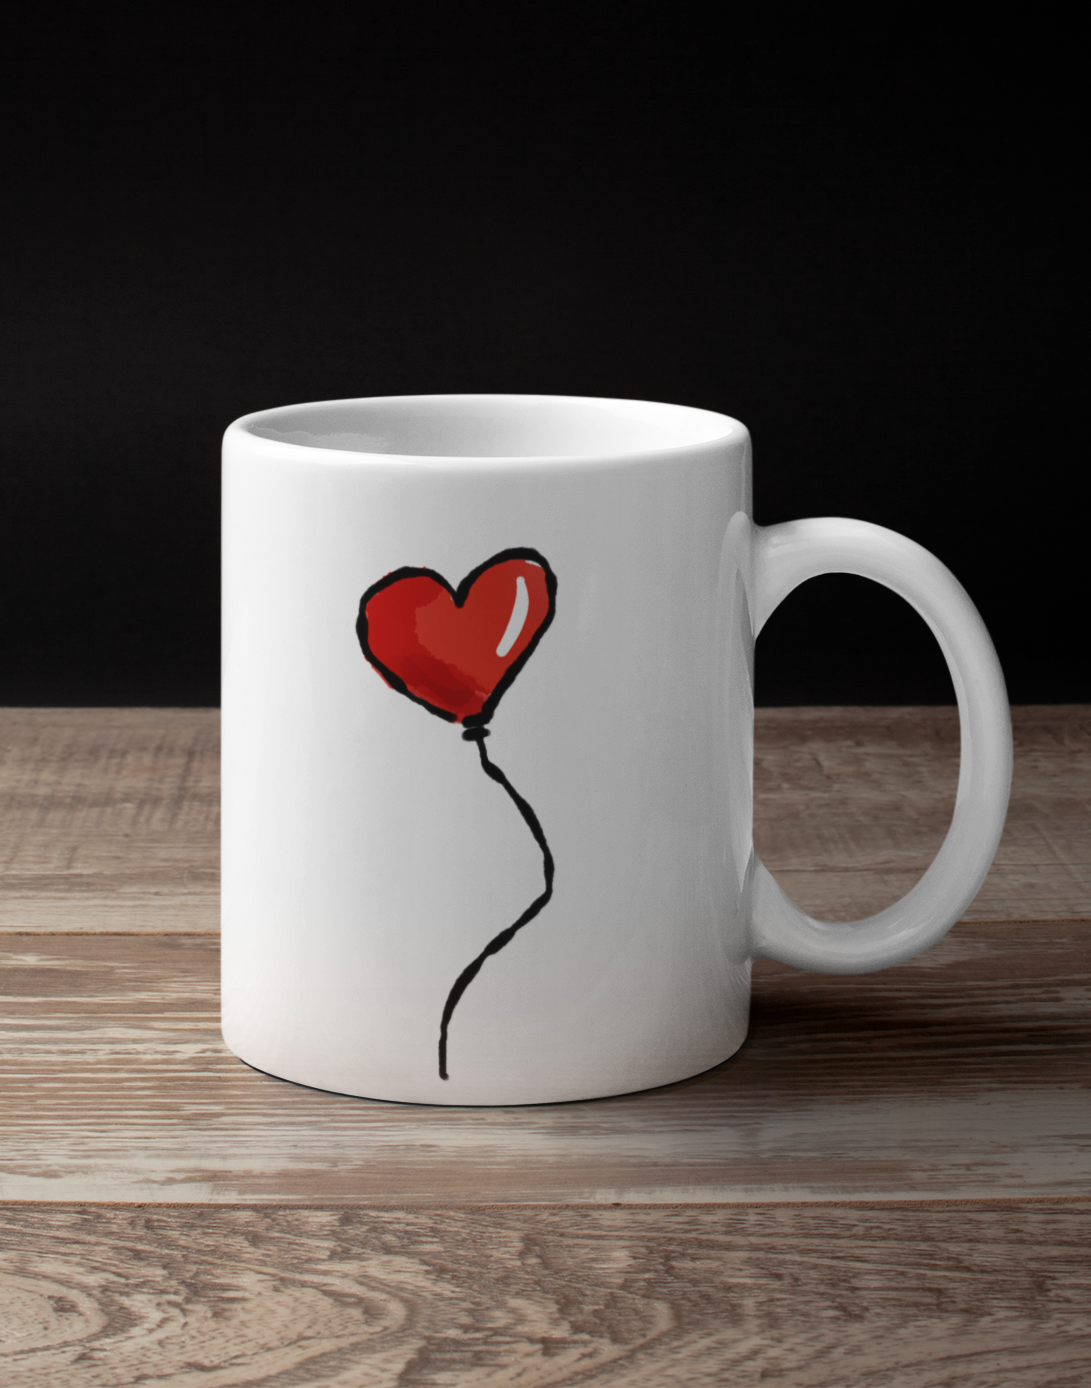 Red Heart Balloon I Love you illustration by Hector and Bone printed on a quality ceramic coffee mug on a wooden table